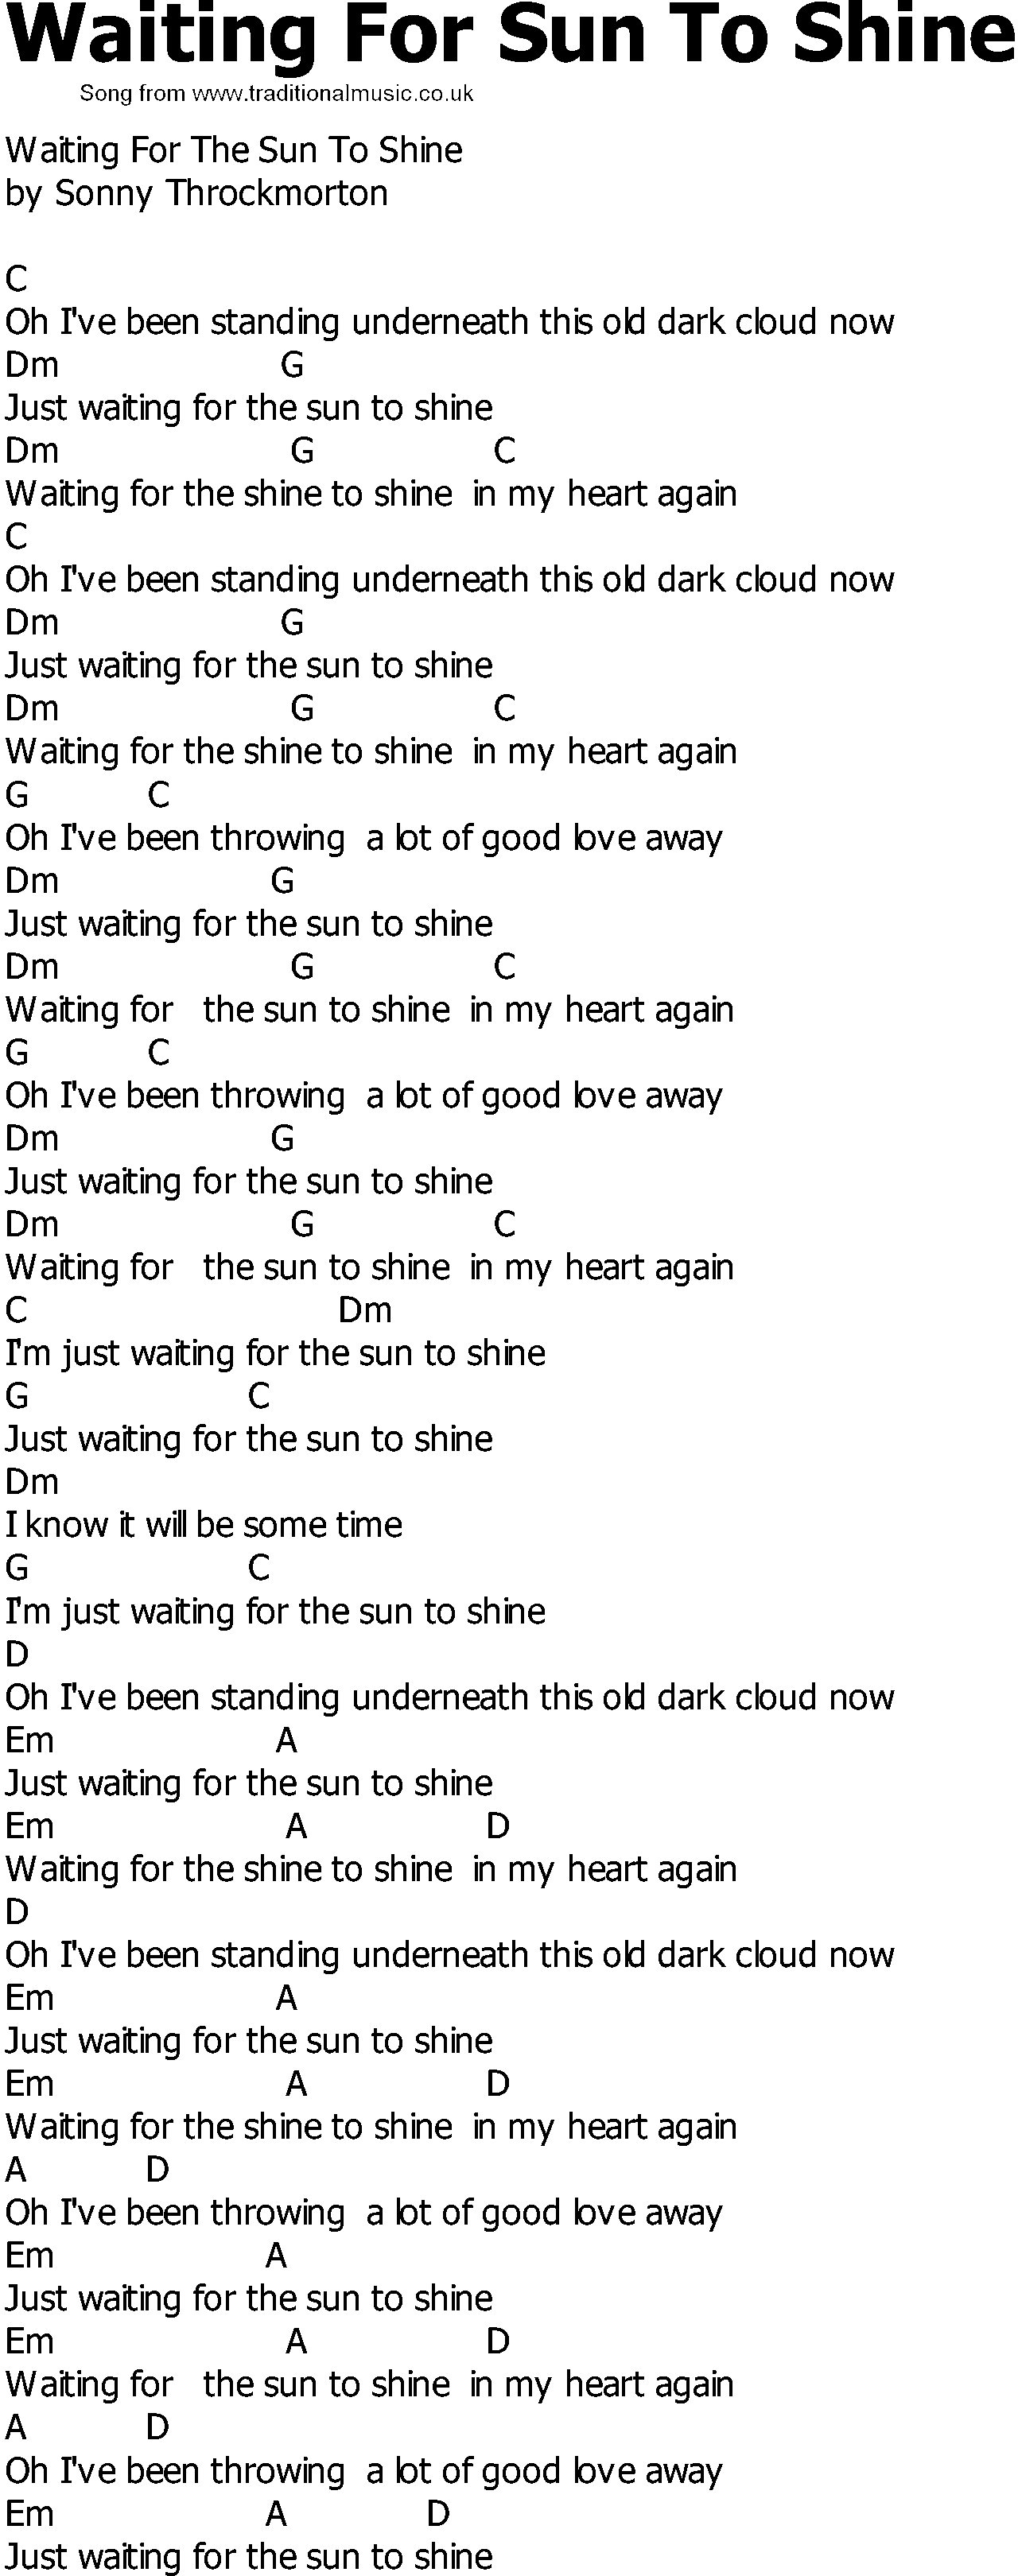 Old Country song lyrics with chords - Waiting For Sun To Shine